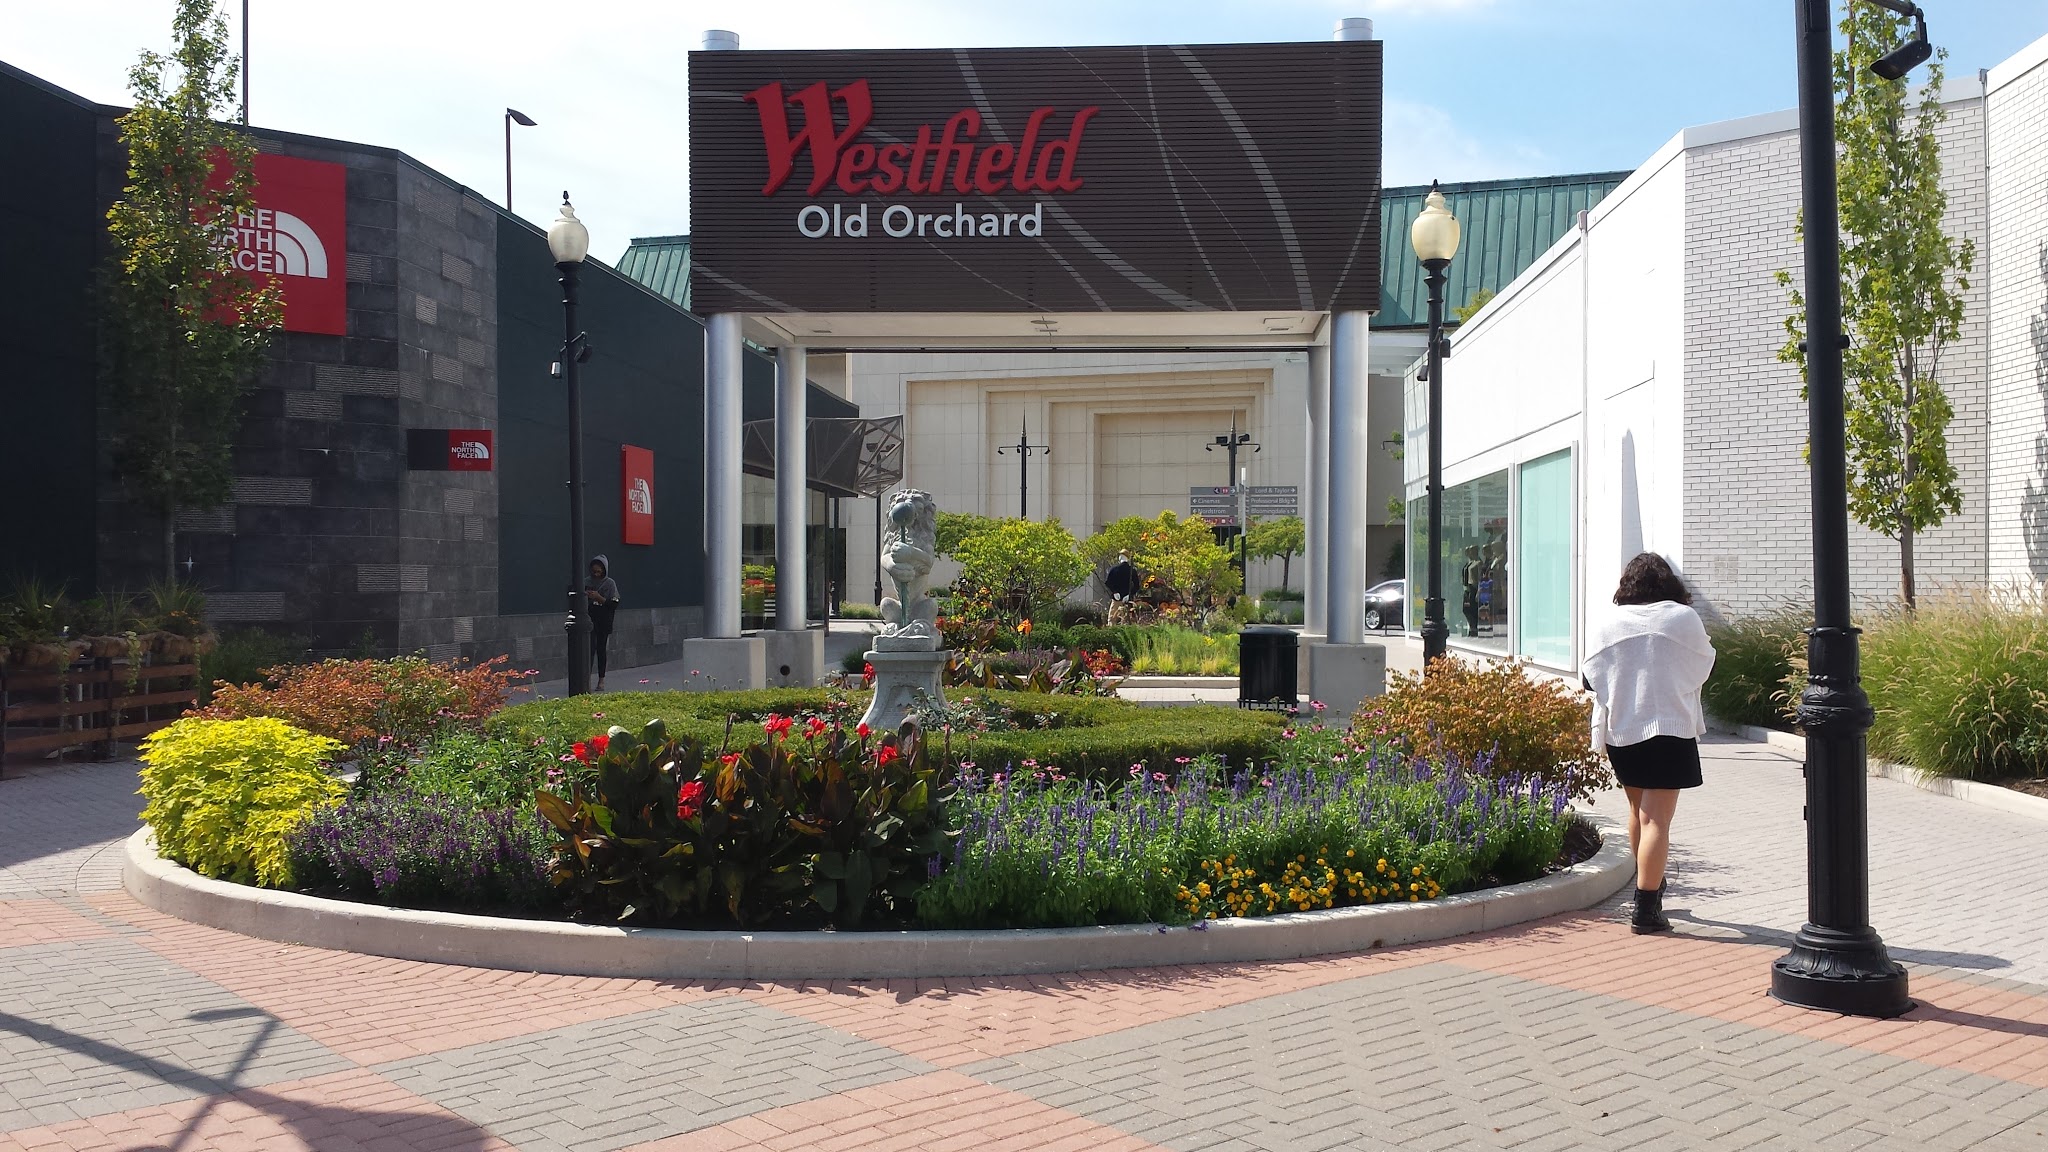 Westfield Old Orchard, Malls and Retail Wiki